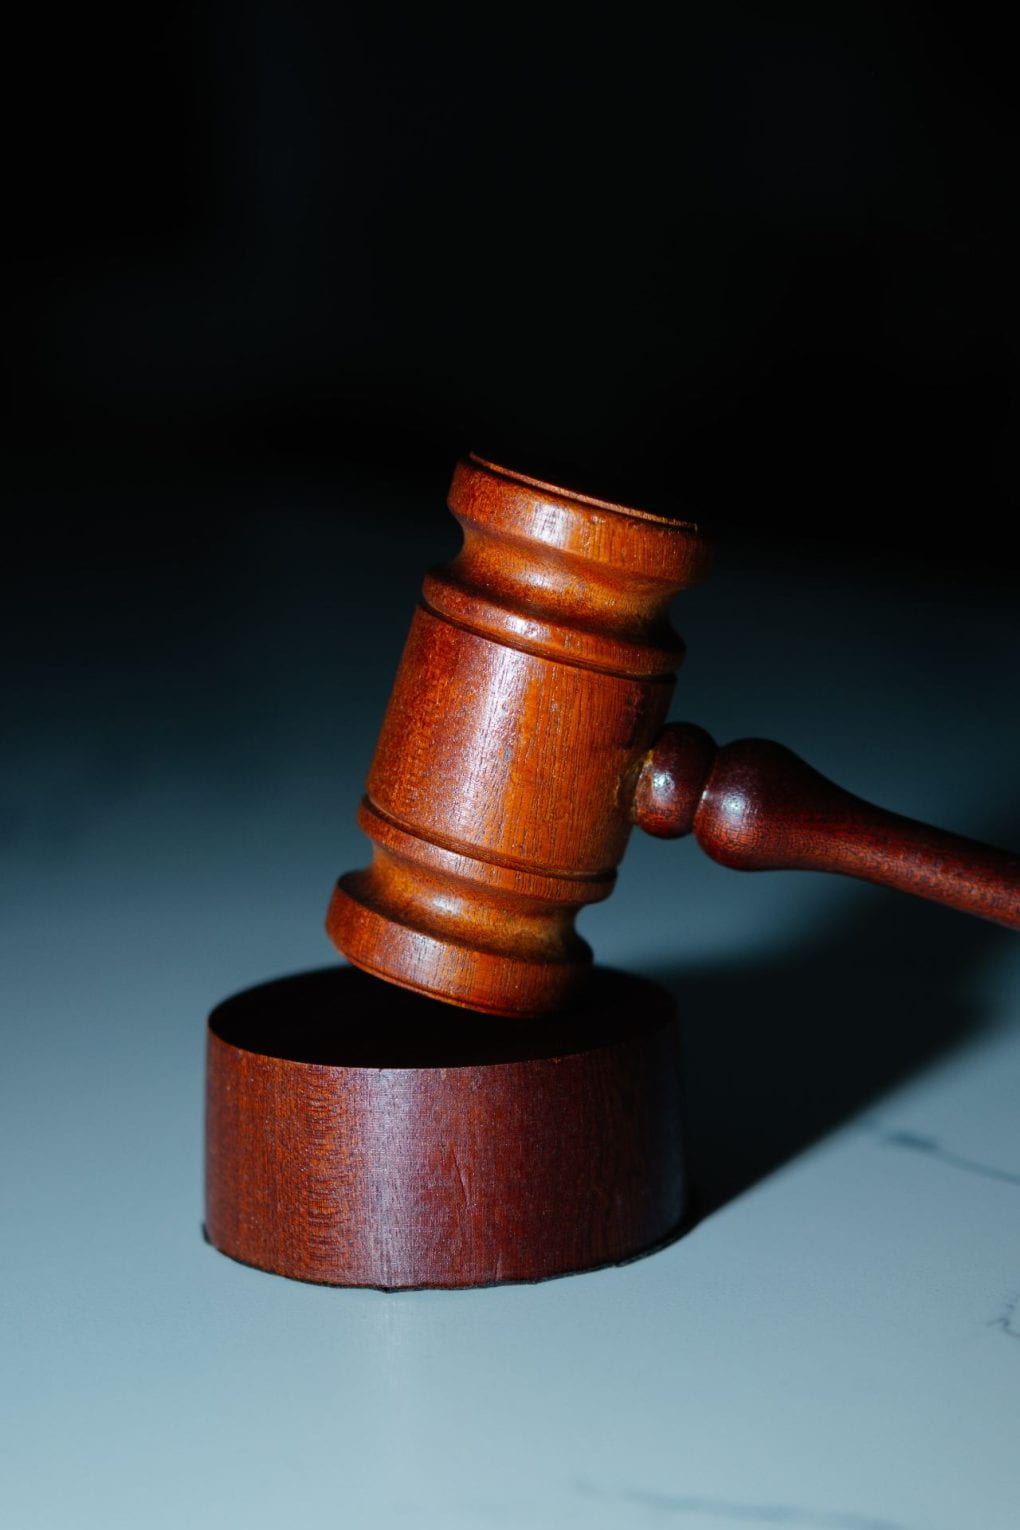 Close up photo of a wooden judge's gavel